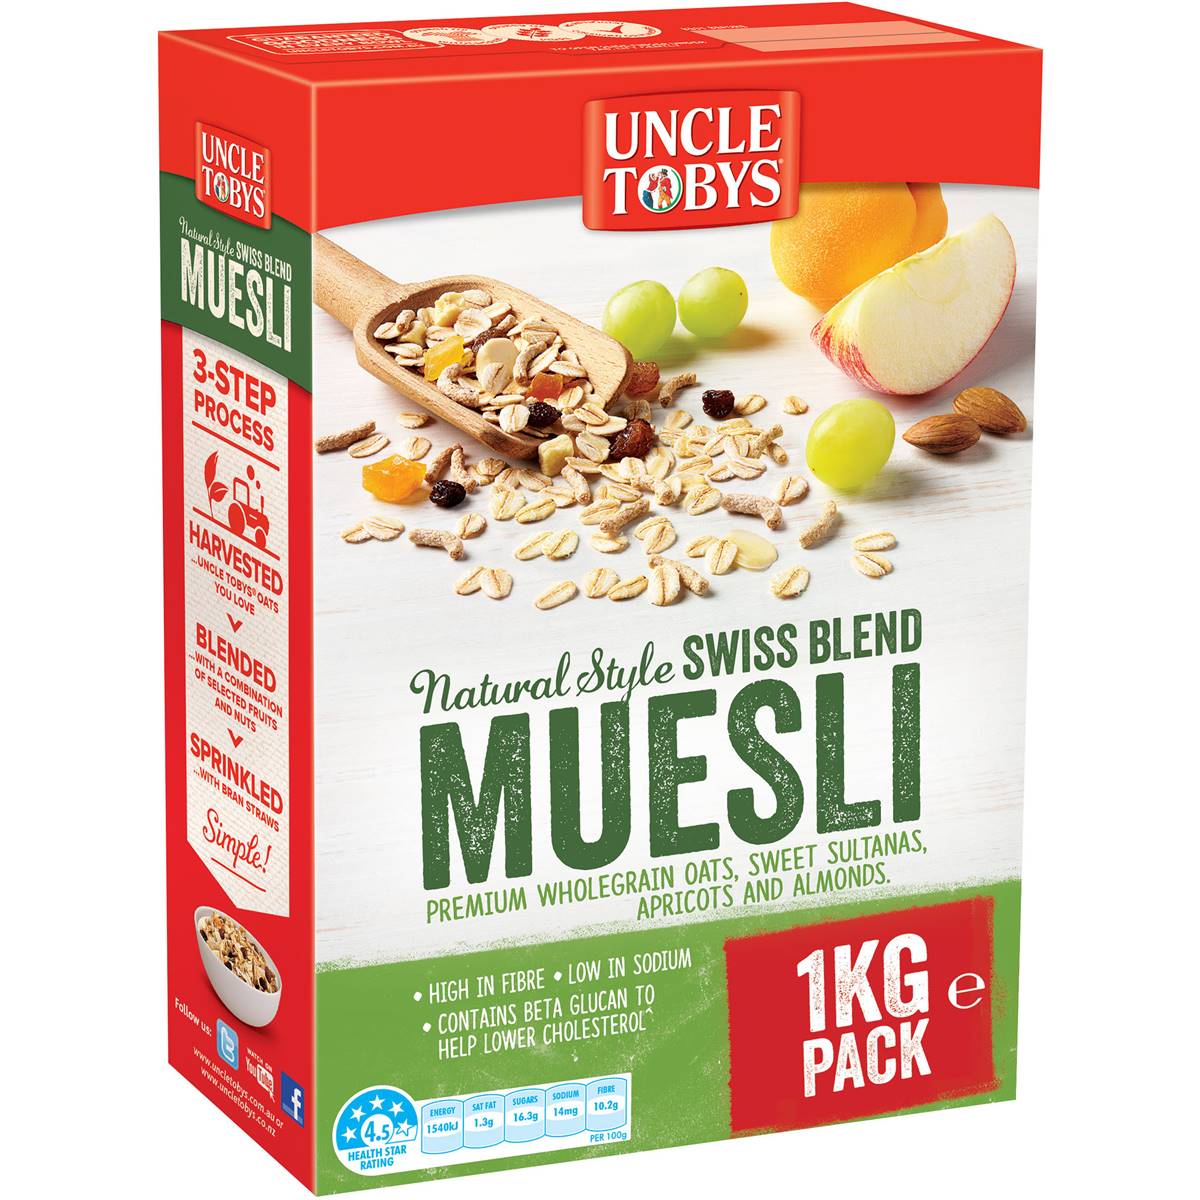 Calories in Nestle Uncle Tobys Natural Style Swiss Blend Muesli